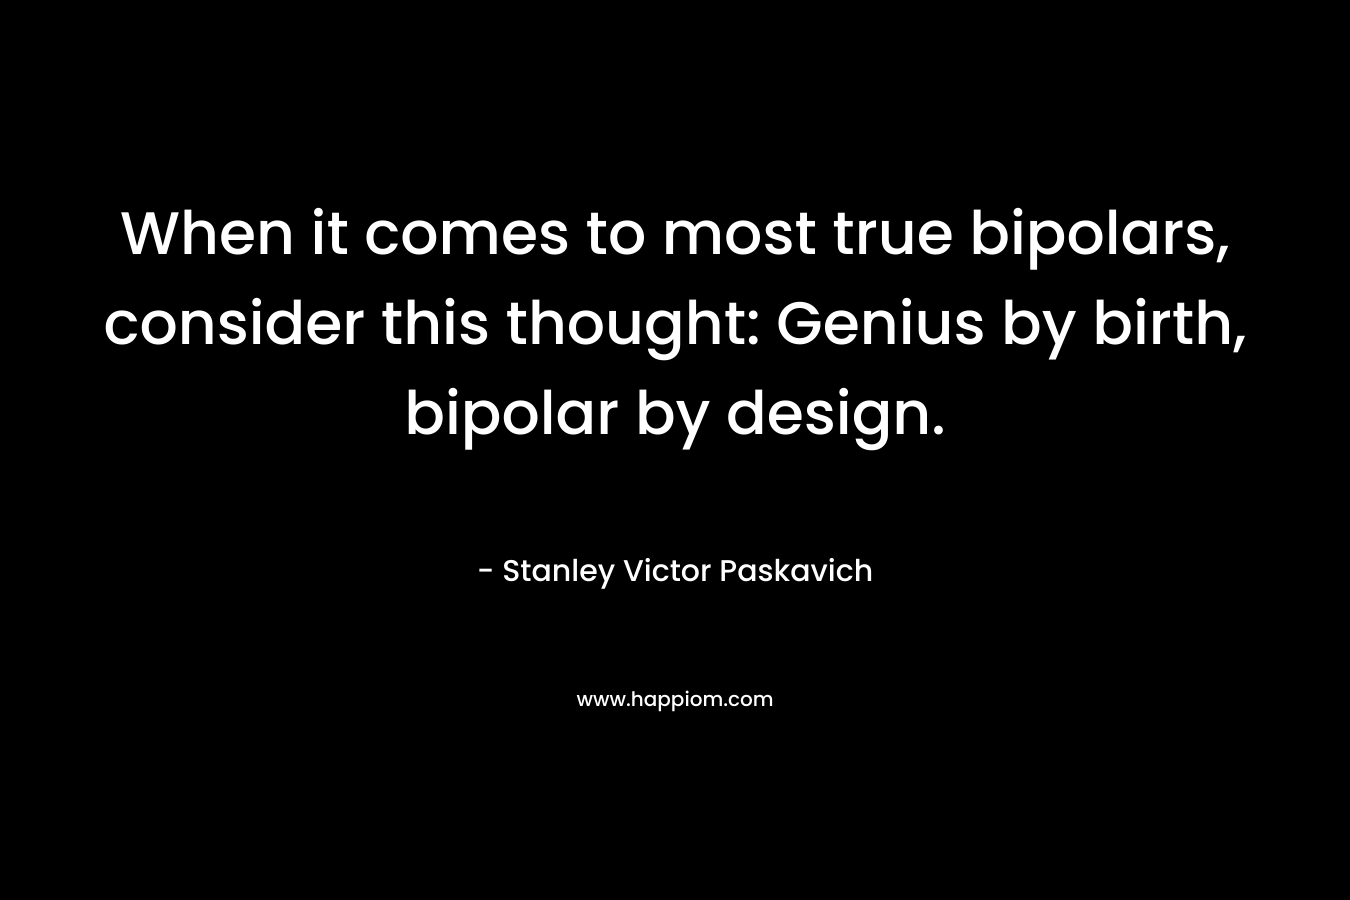 When it comes to most true bipolars, consider this thought: Genius by birth, bipolar by design.